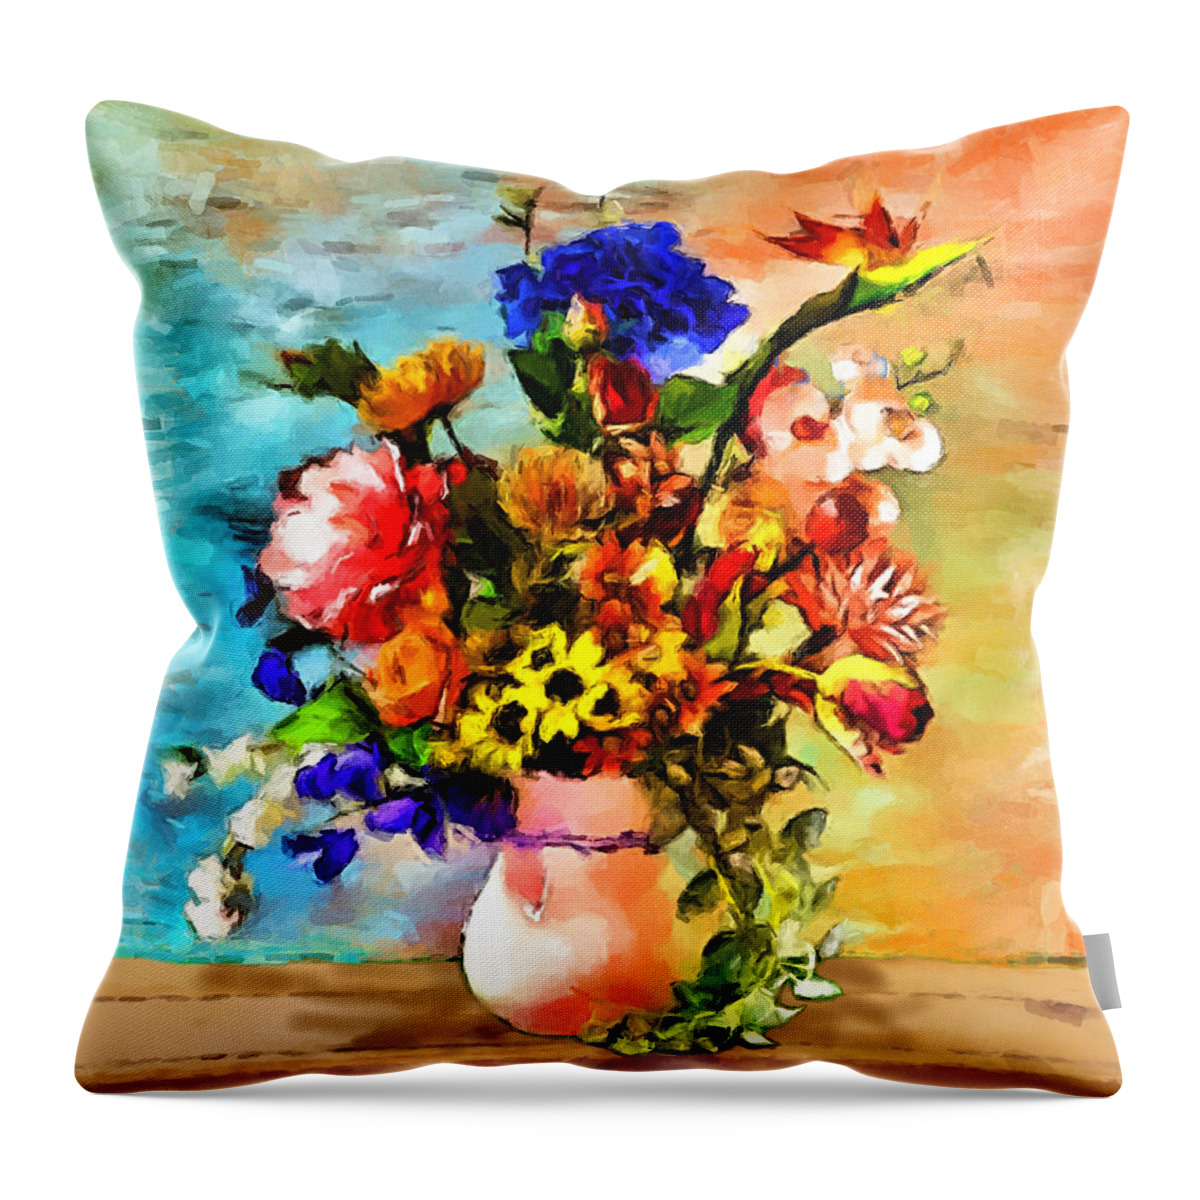 Bouquet 3 Throw Pillow featuring the painting Bouquet 3 by Gary Arnold